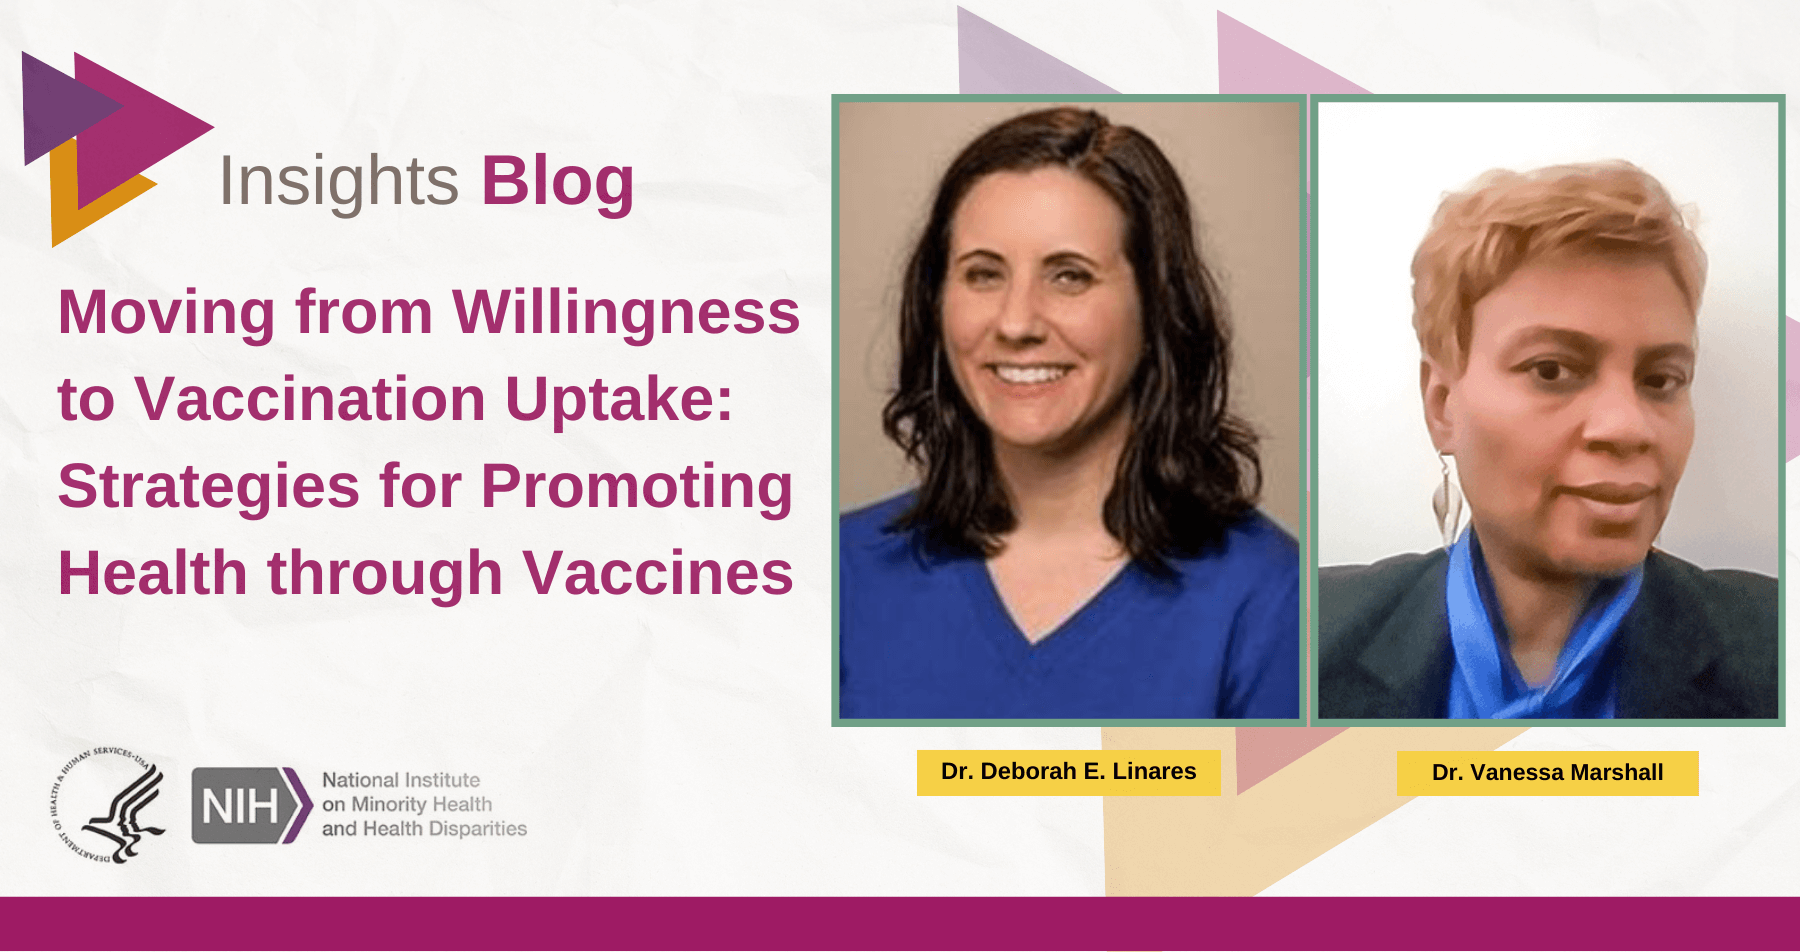 NIMHD Insights Blog: Moving From Willingness to Vaccination Uptake: Strategies for Promoting Health Through Vaccines. Photos of authors, Drs. Deborah E. Linares and Vanessa Marshall